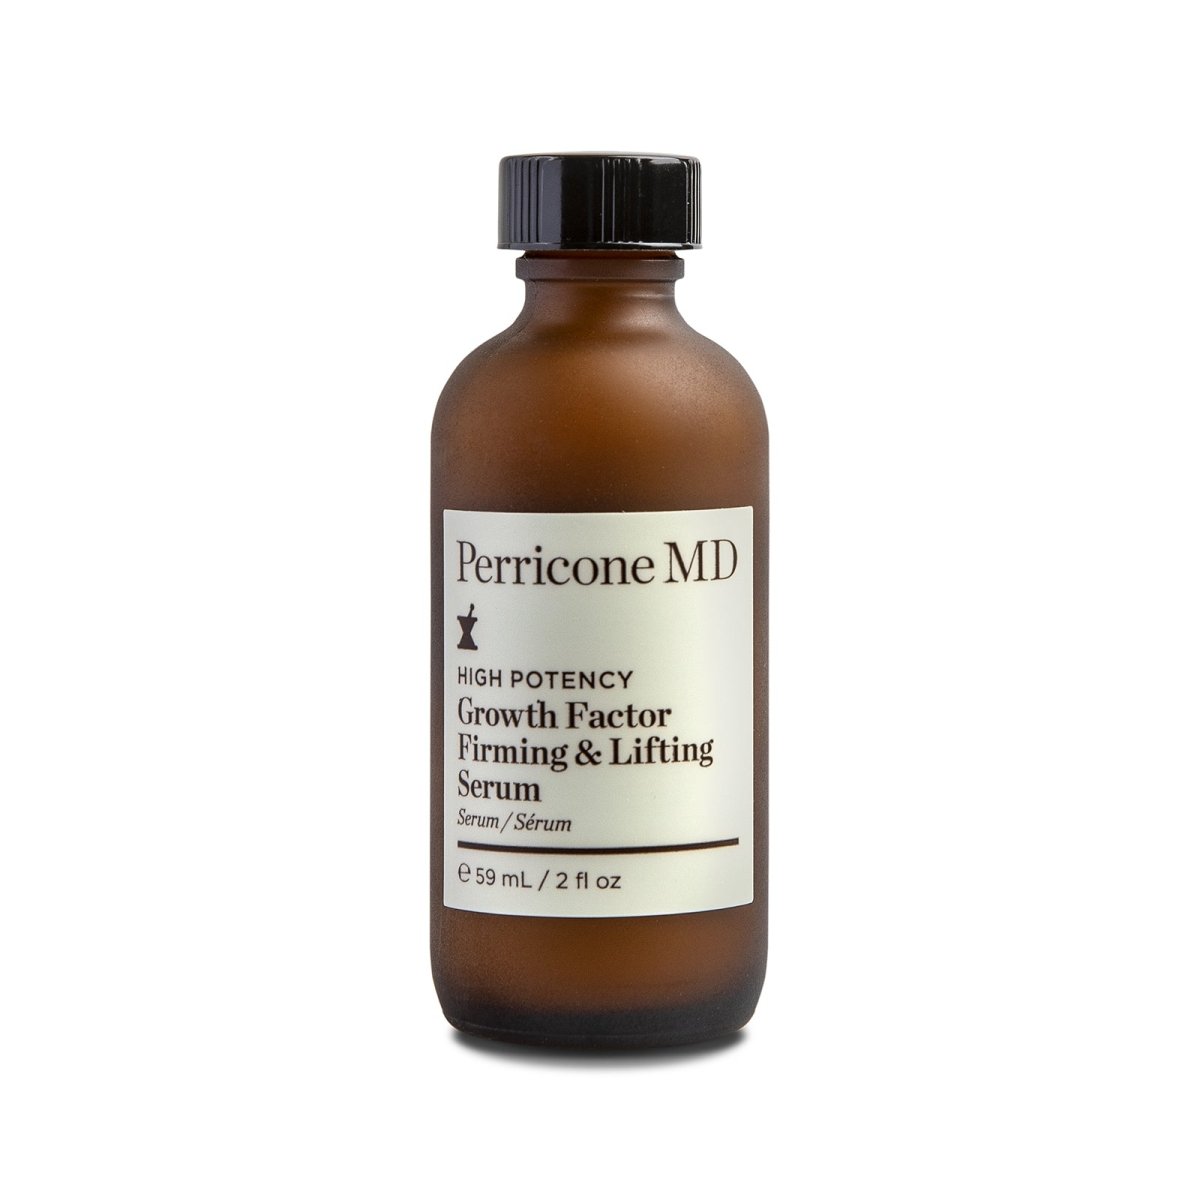 Perricone MD High Potency Growth Factor Firming & Lifting Serum - SkincareEssentials